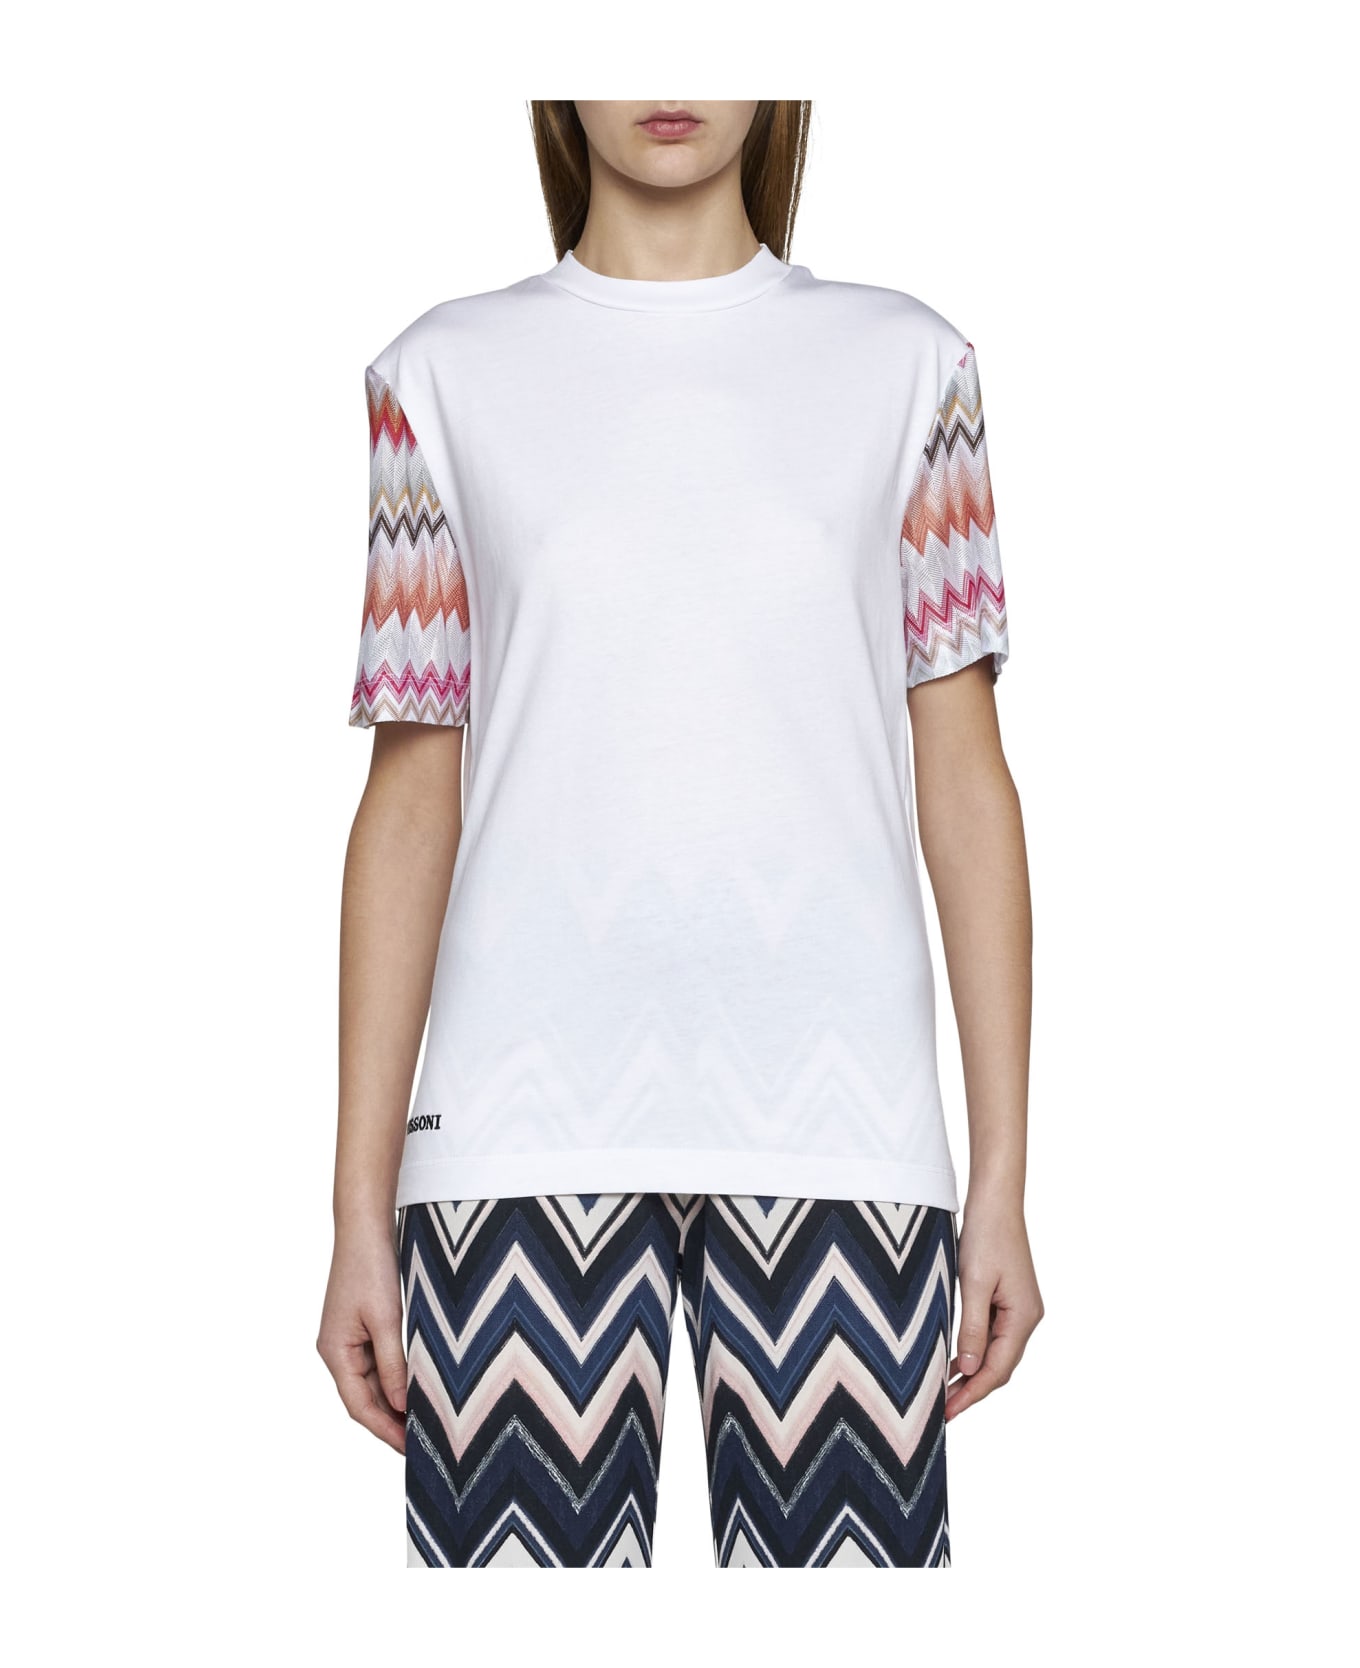 Missoni Logo Embroidered Zigzag Sleeved T-shirt - Lgt Tone Multic Wht